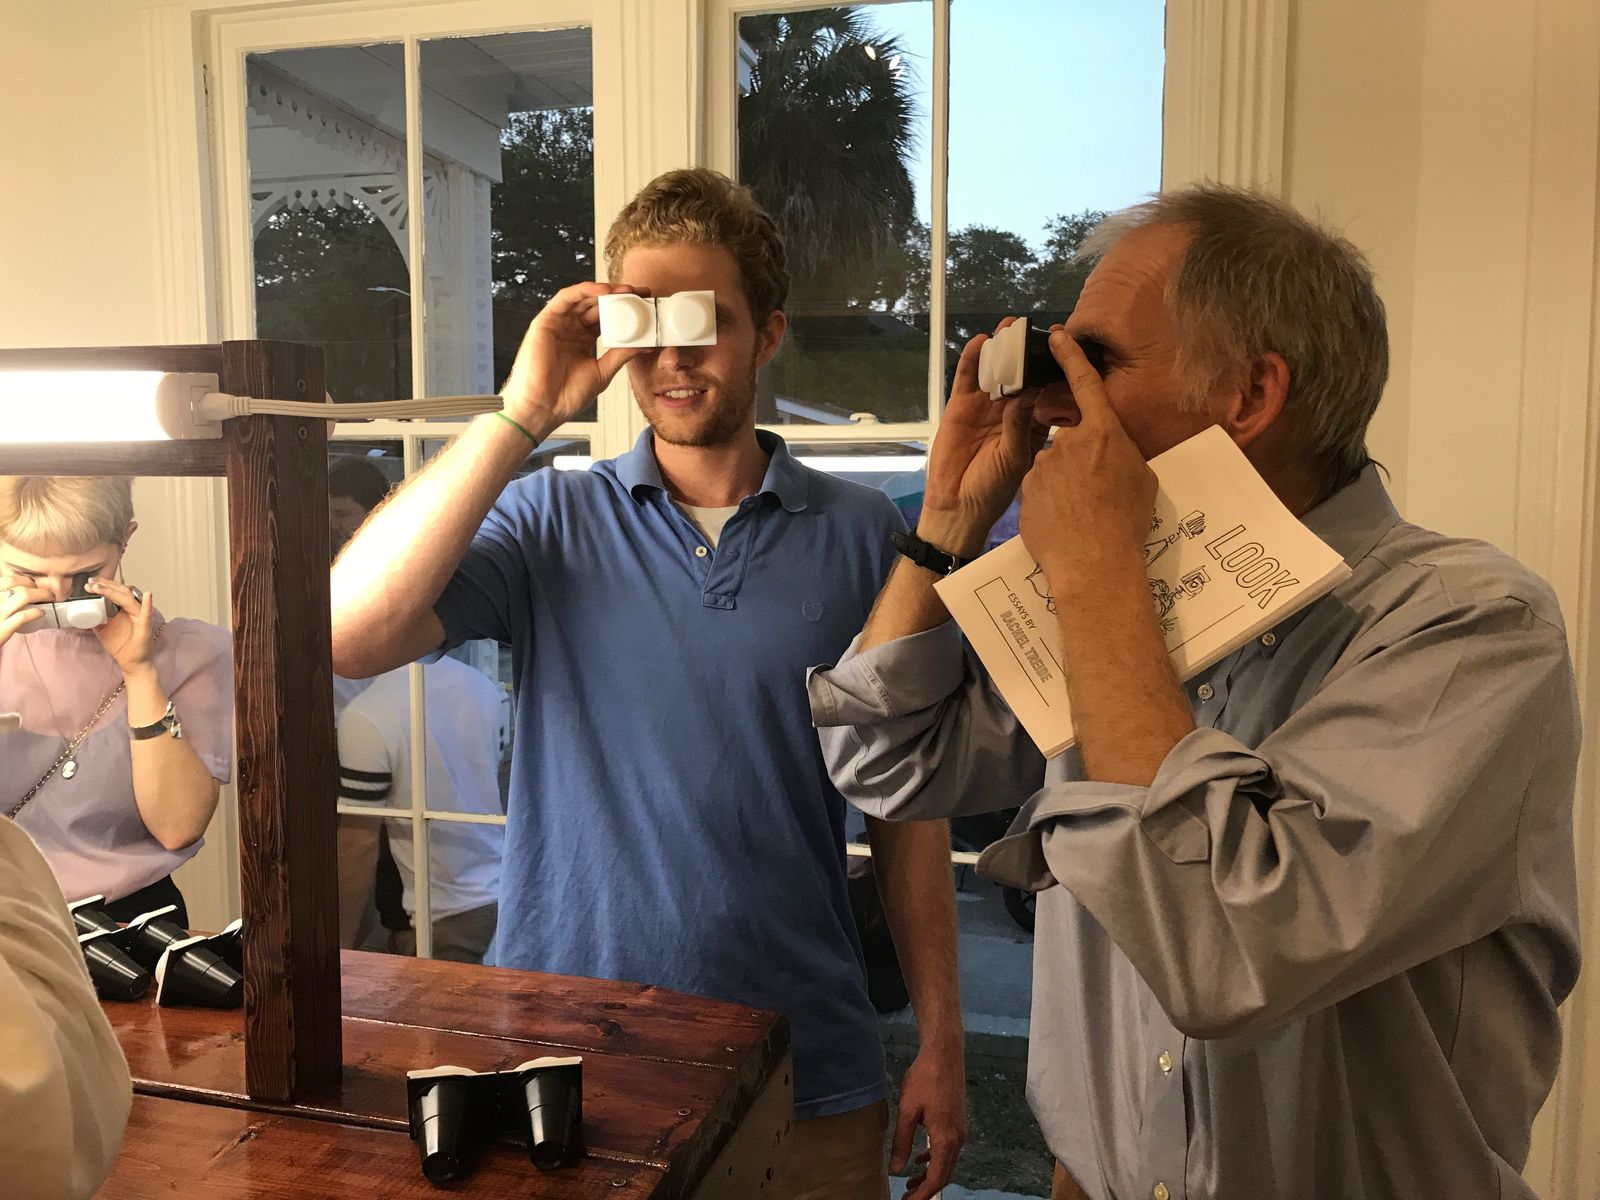 © RACHEL TREIDE - Visitors to 2019 exhibition "LOOK" that featured 31 of Treide's stereographs look through stereoscopes